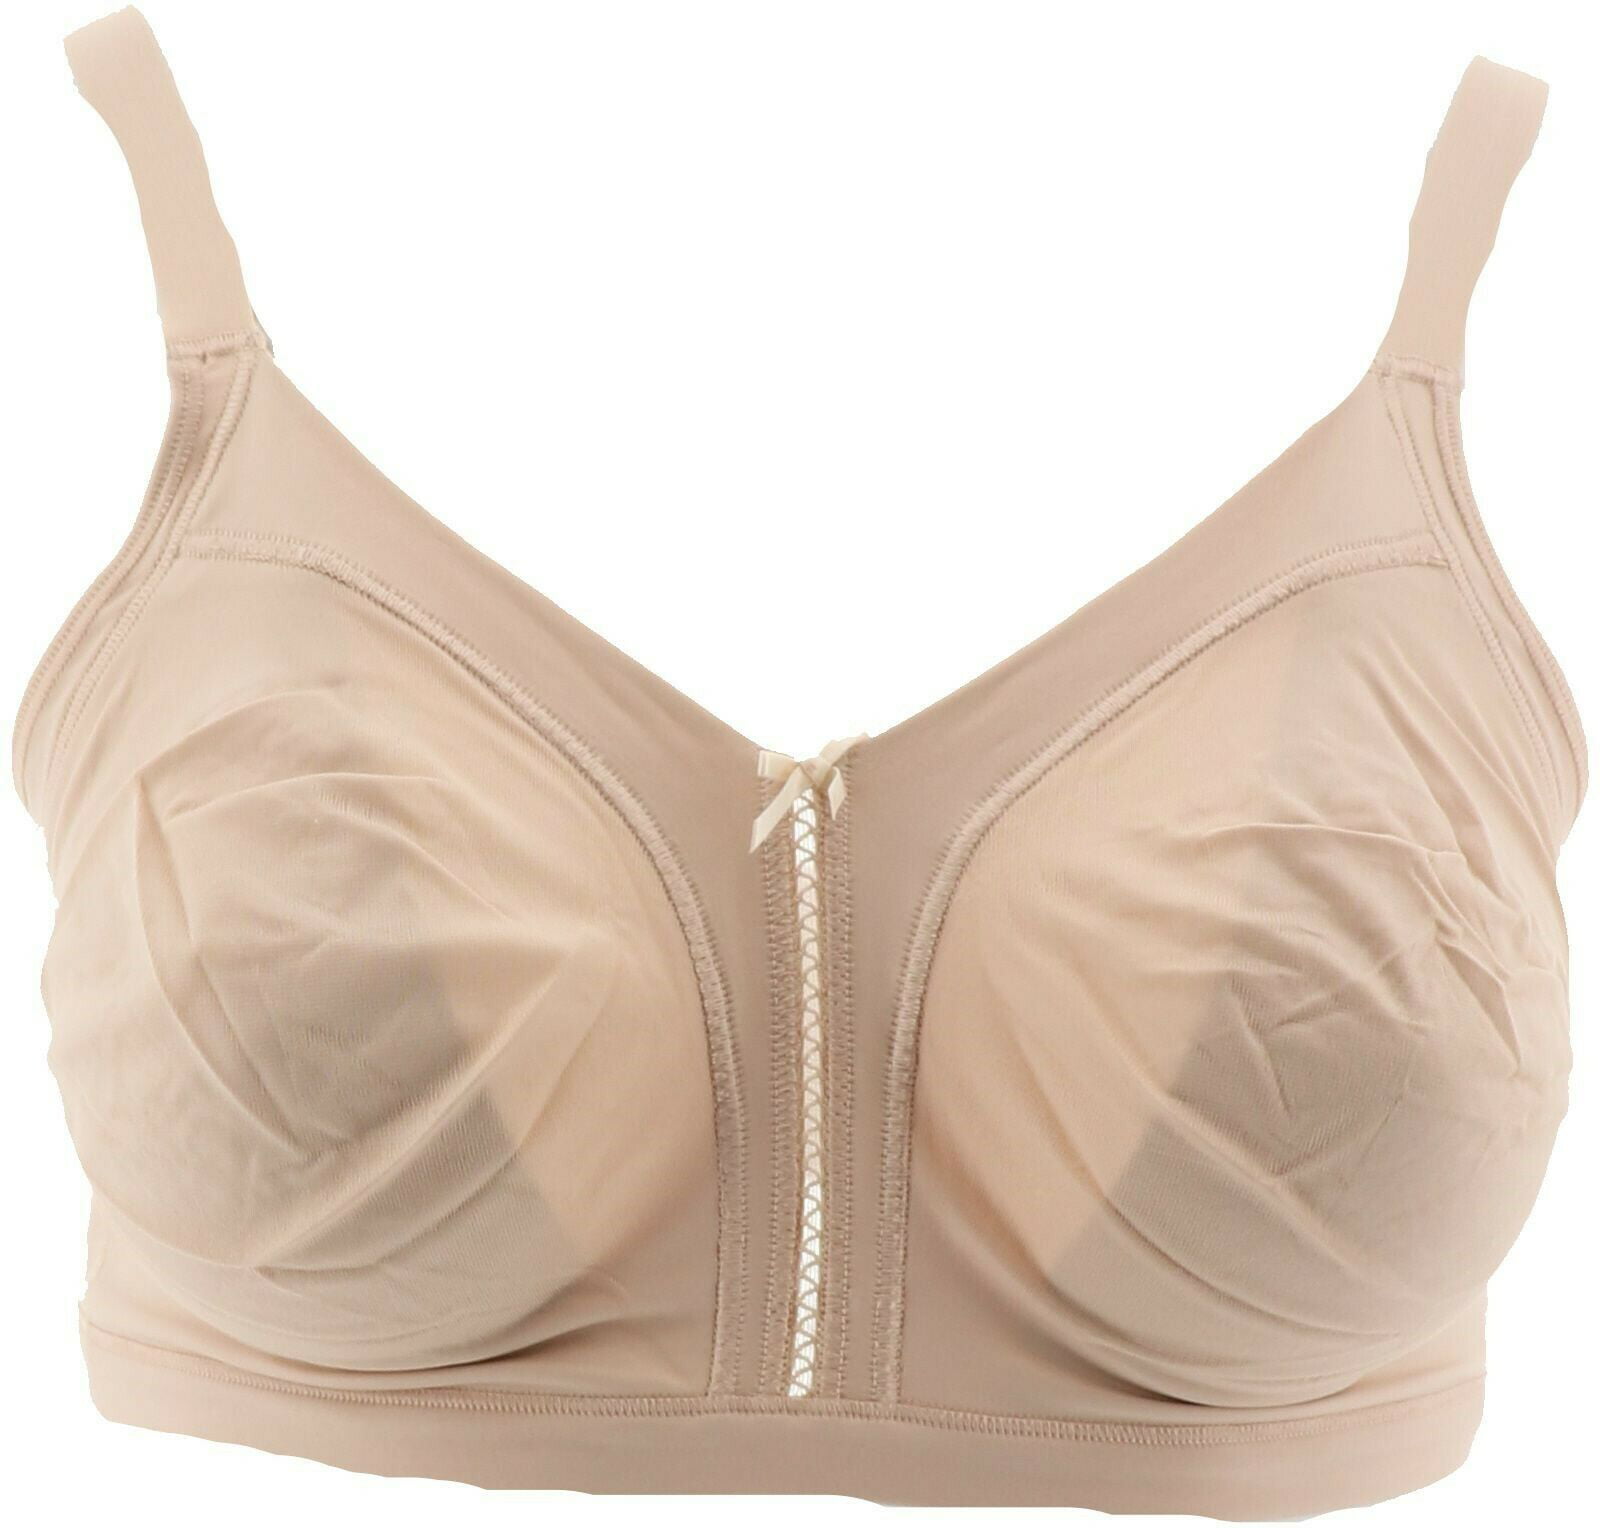 Bali - Bali 2 Double Support Soft Touch Wirefree Bras Women's A351140